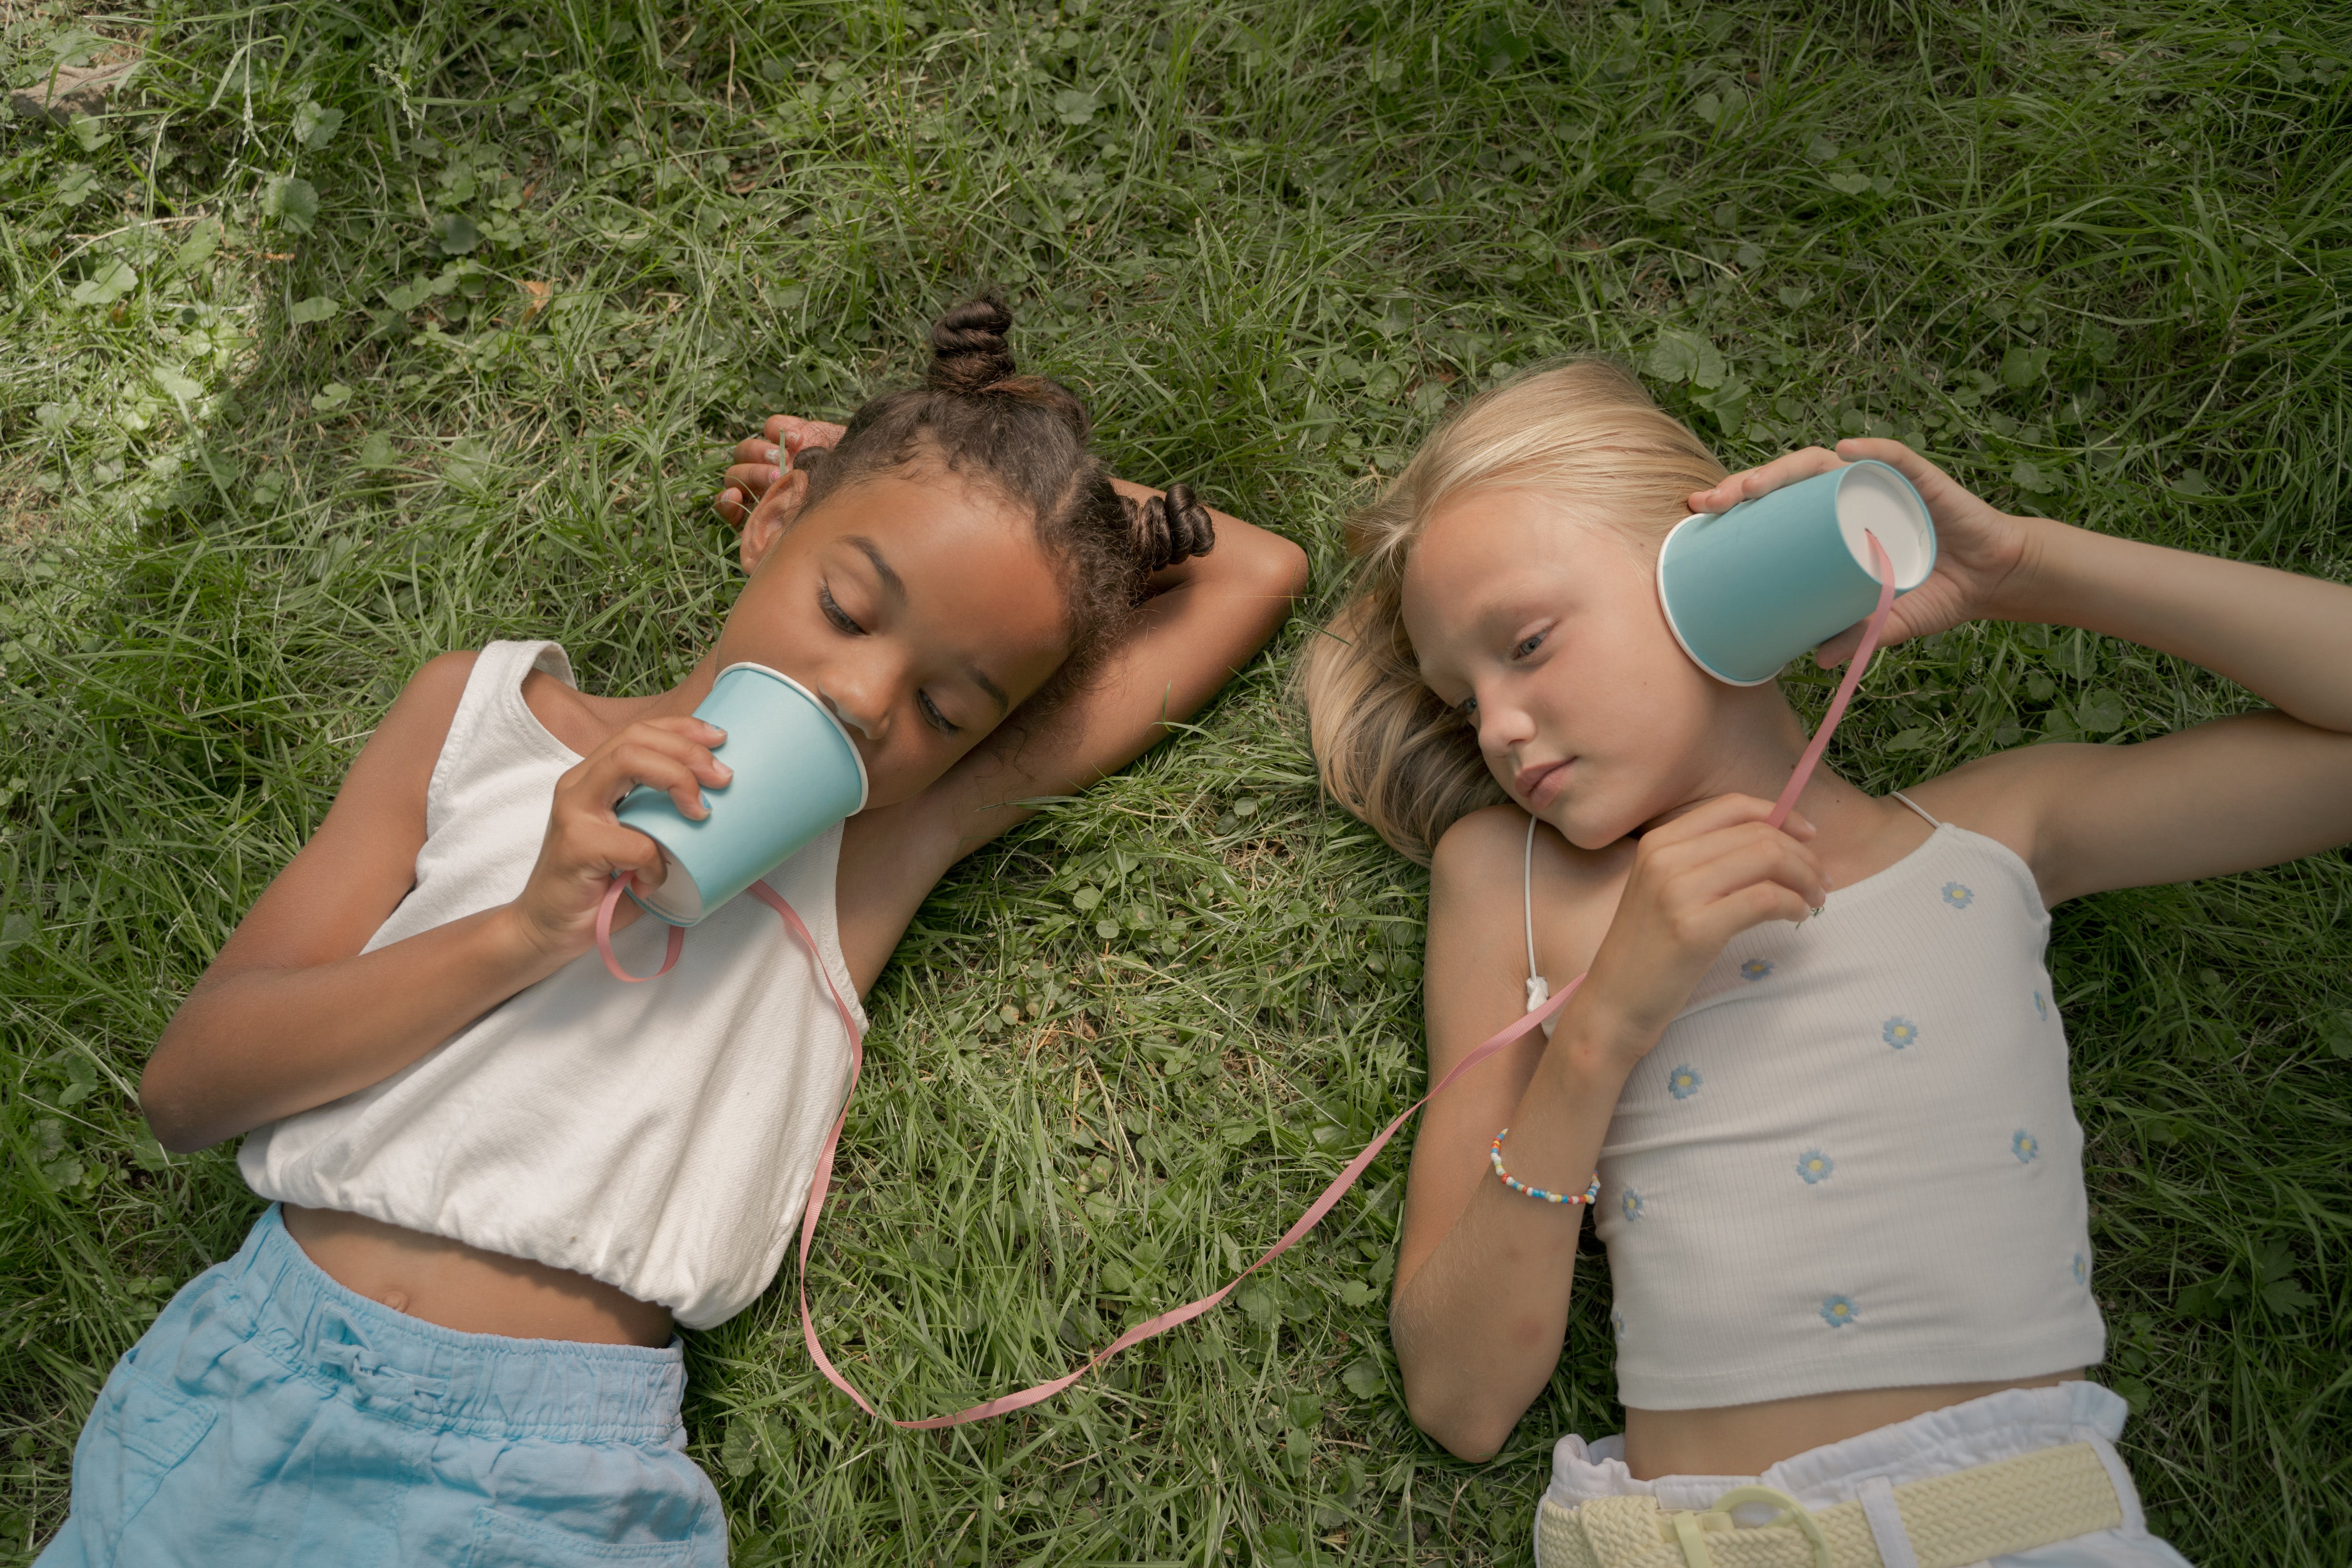 Two young girls | Source: Pexels